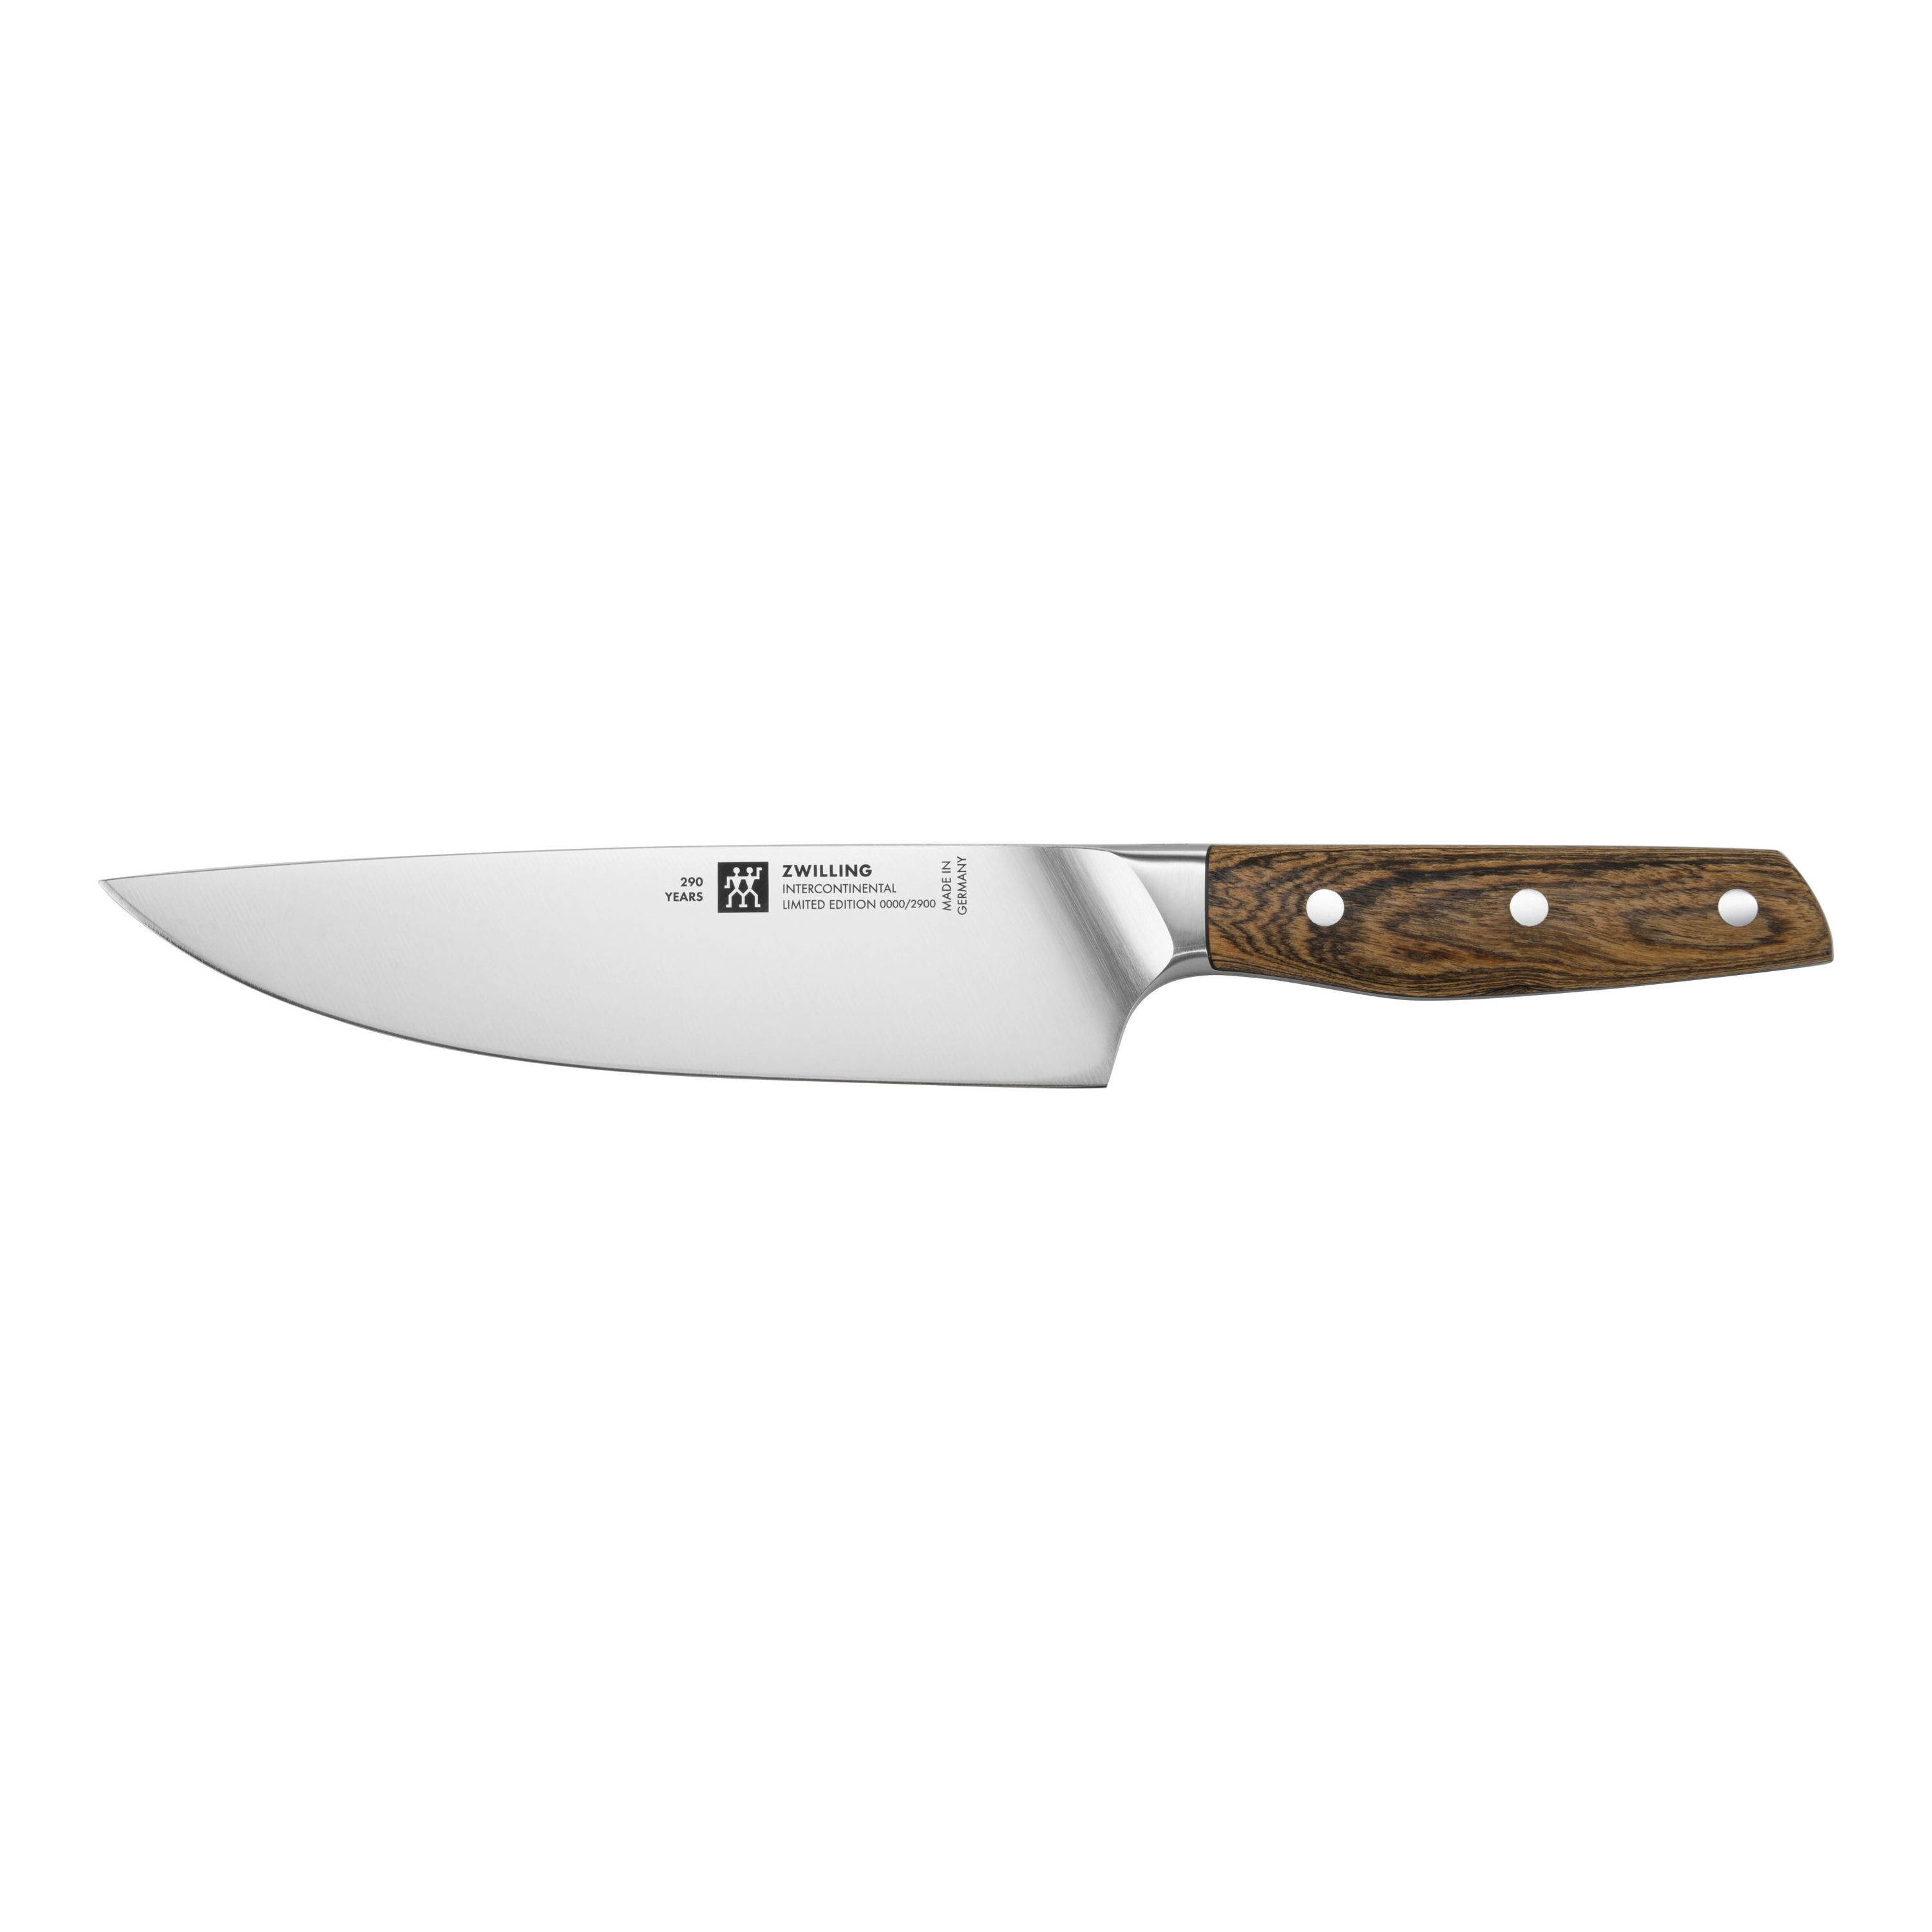 ZWILLING Special Edition 8-inch, Chef's knife